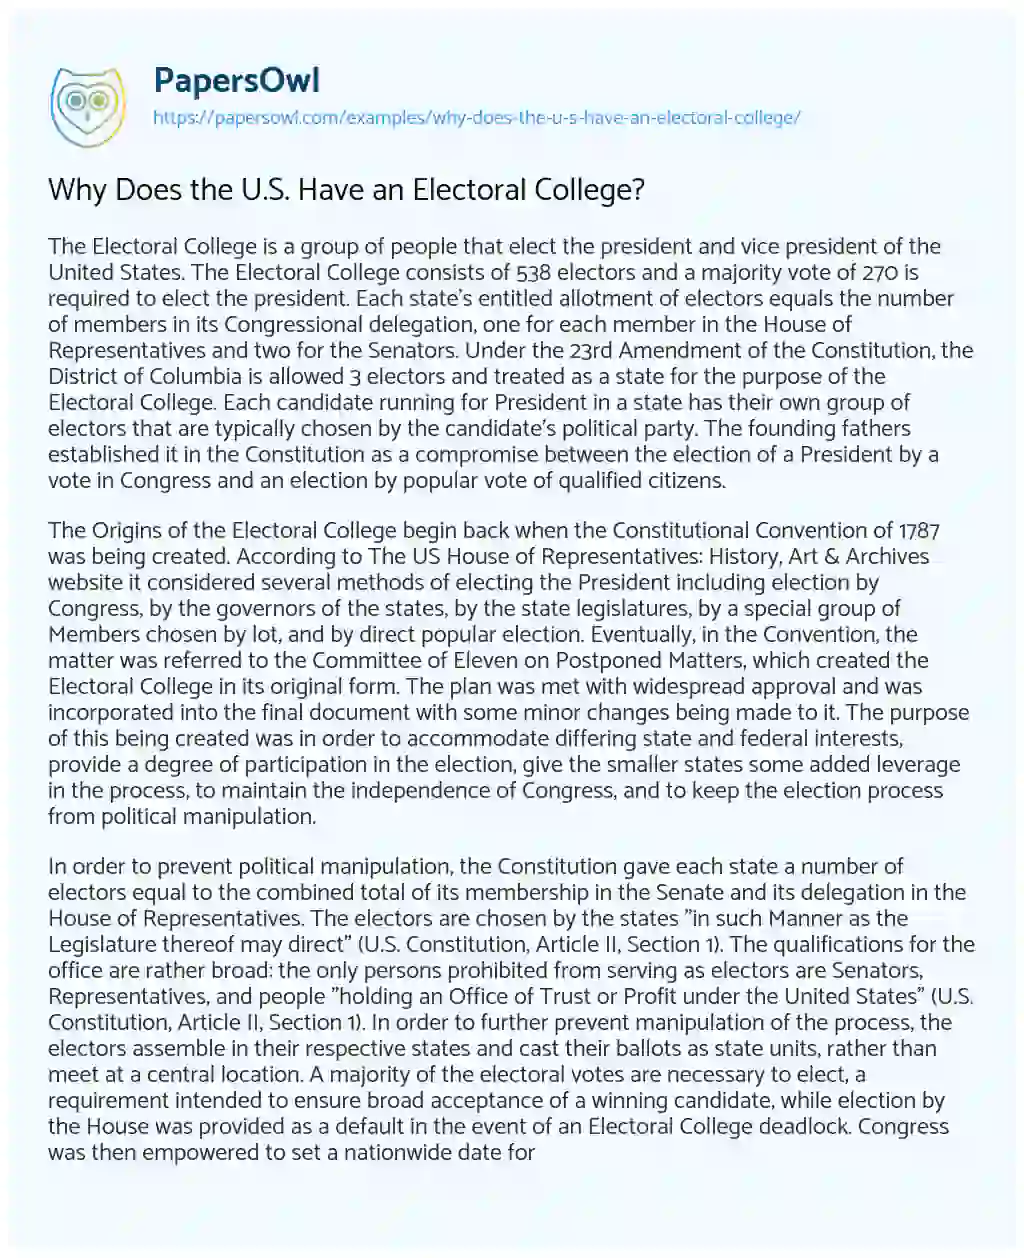 Why does the U.S. have an Electoral College? essay